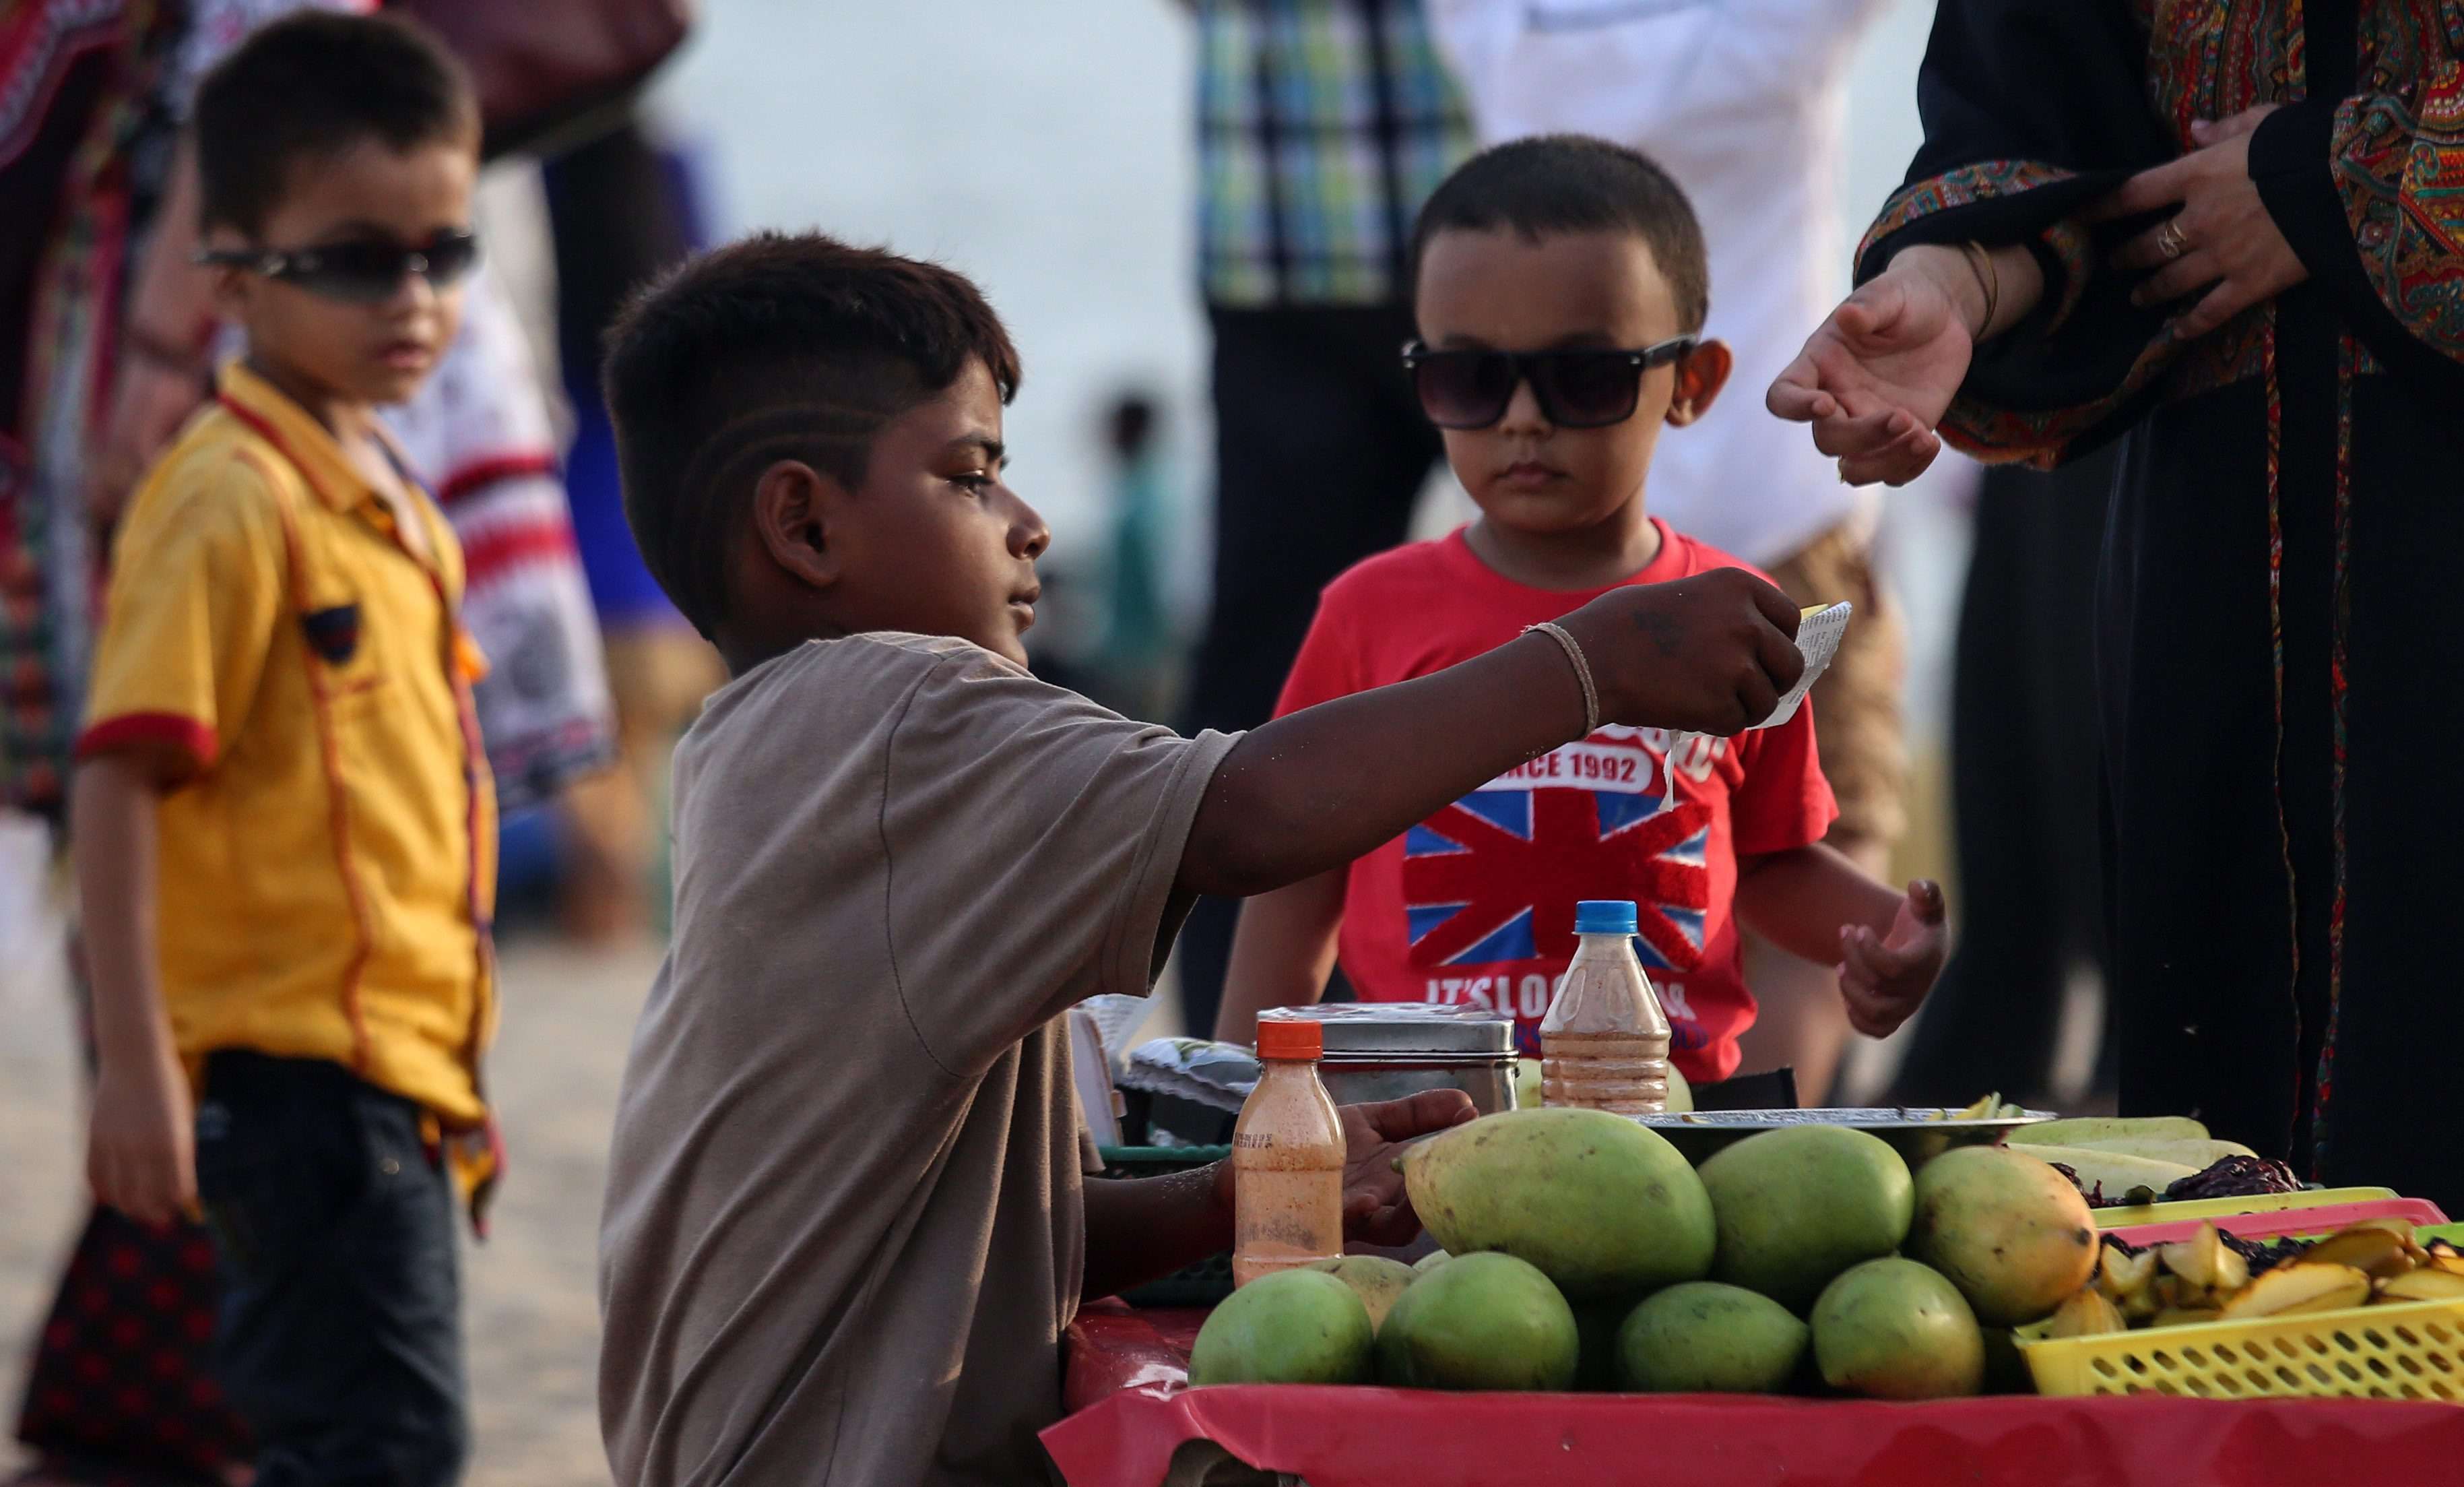 A boy sells mangoes at a beach in Mumbai, India. The Indian government has passed legislation to prohibit children between 14 and 18 years old from engaging in hazardous occupations. However, children under 14 are allowed to work in non-hazardous family enterprises and entertainment occupations. Photo: EPA